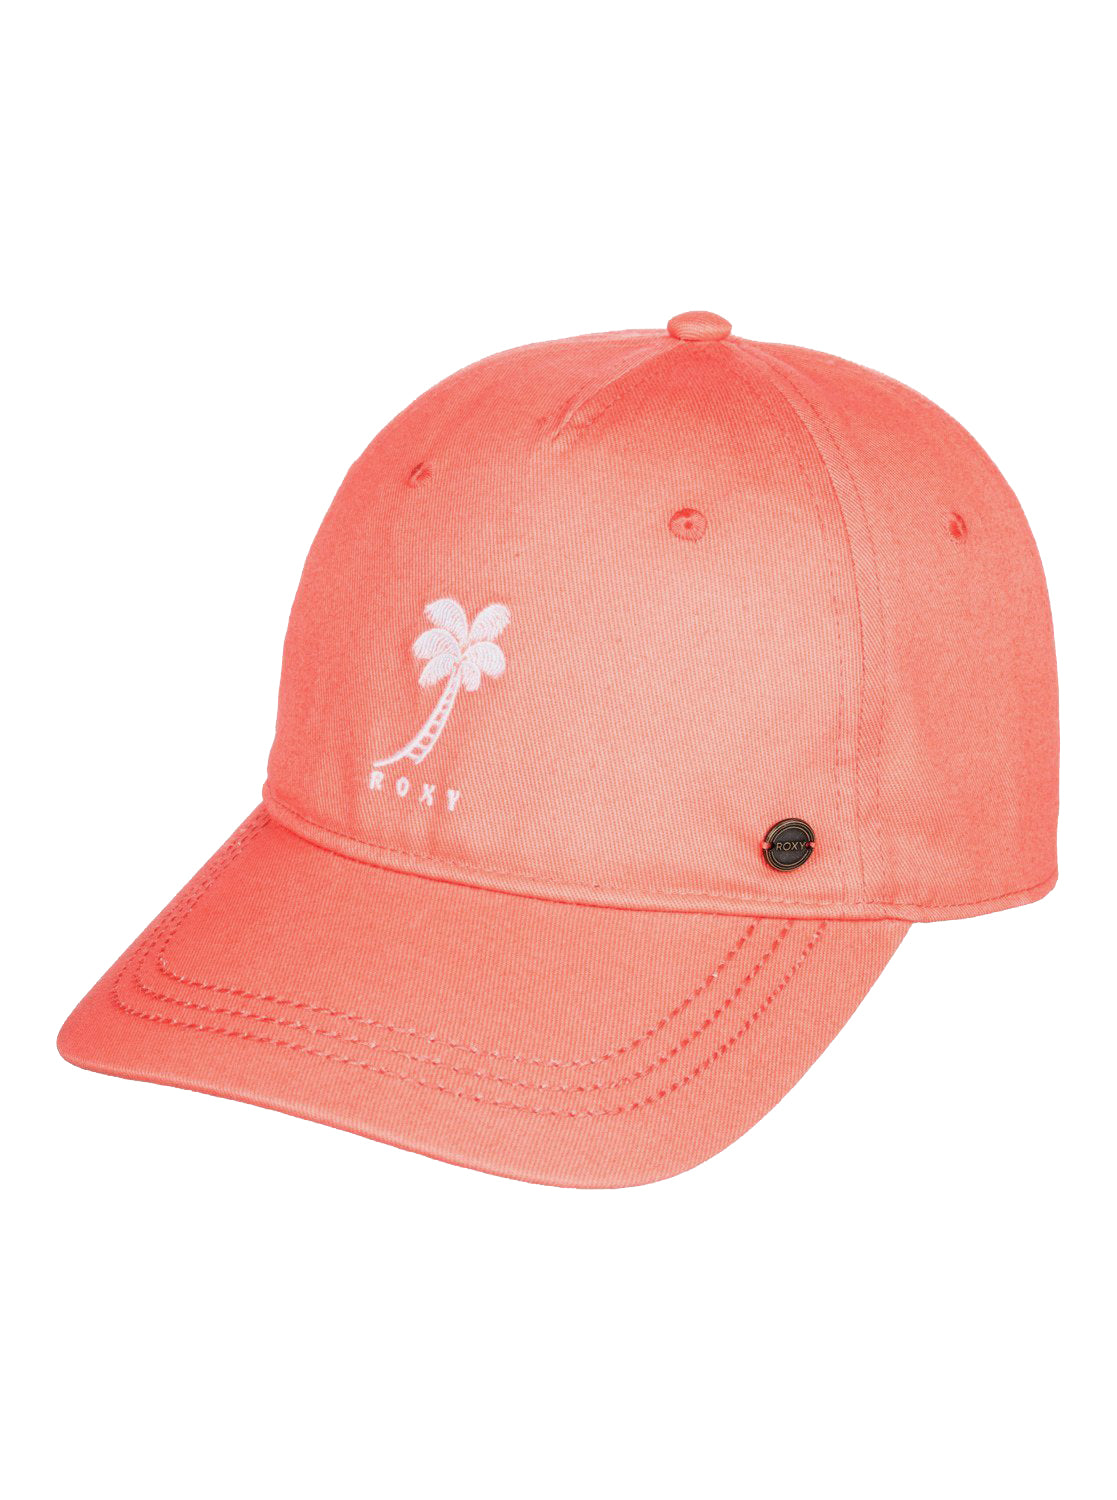 Roxy Next Level Color Hat MHF0 OS